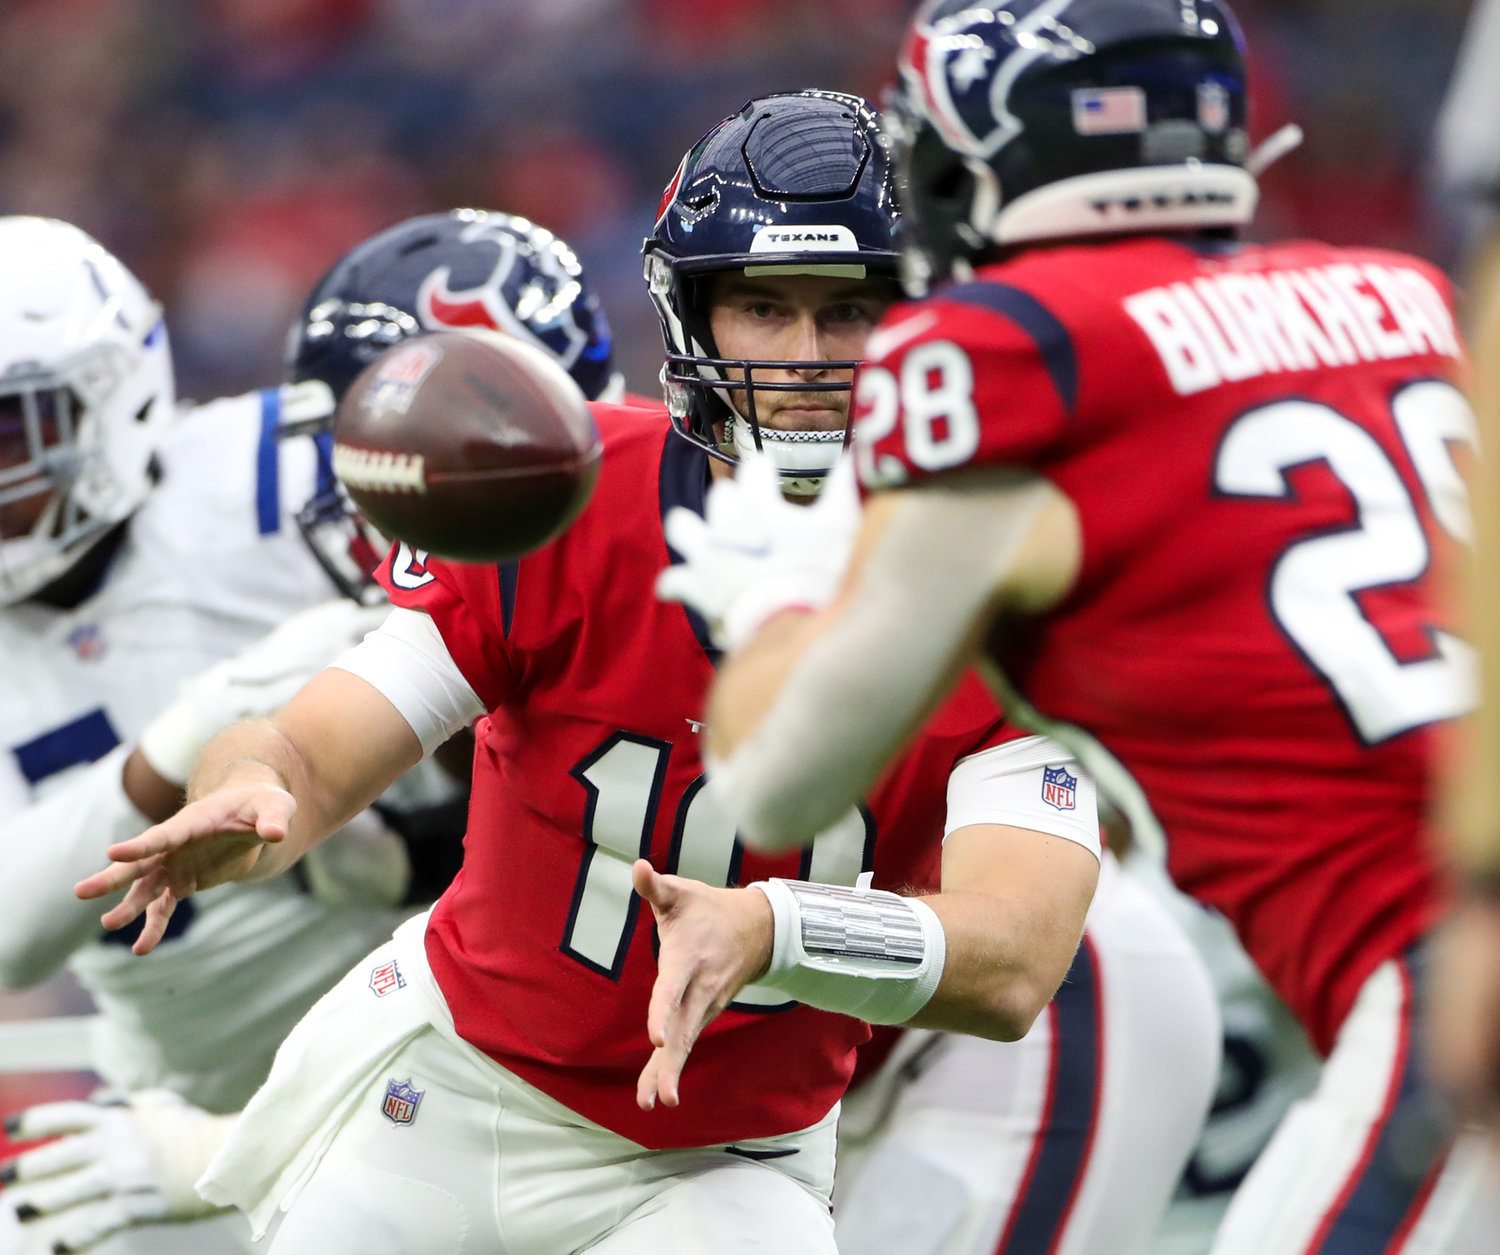 Houston Texans quarterback Davis Mills (10) pitches the ball to running back Rex Burkhead (28) during an NFL game between the Texans and the Colts on December 5, 2021 in Houston, Texas. The Colts won, 31-0.